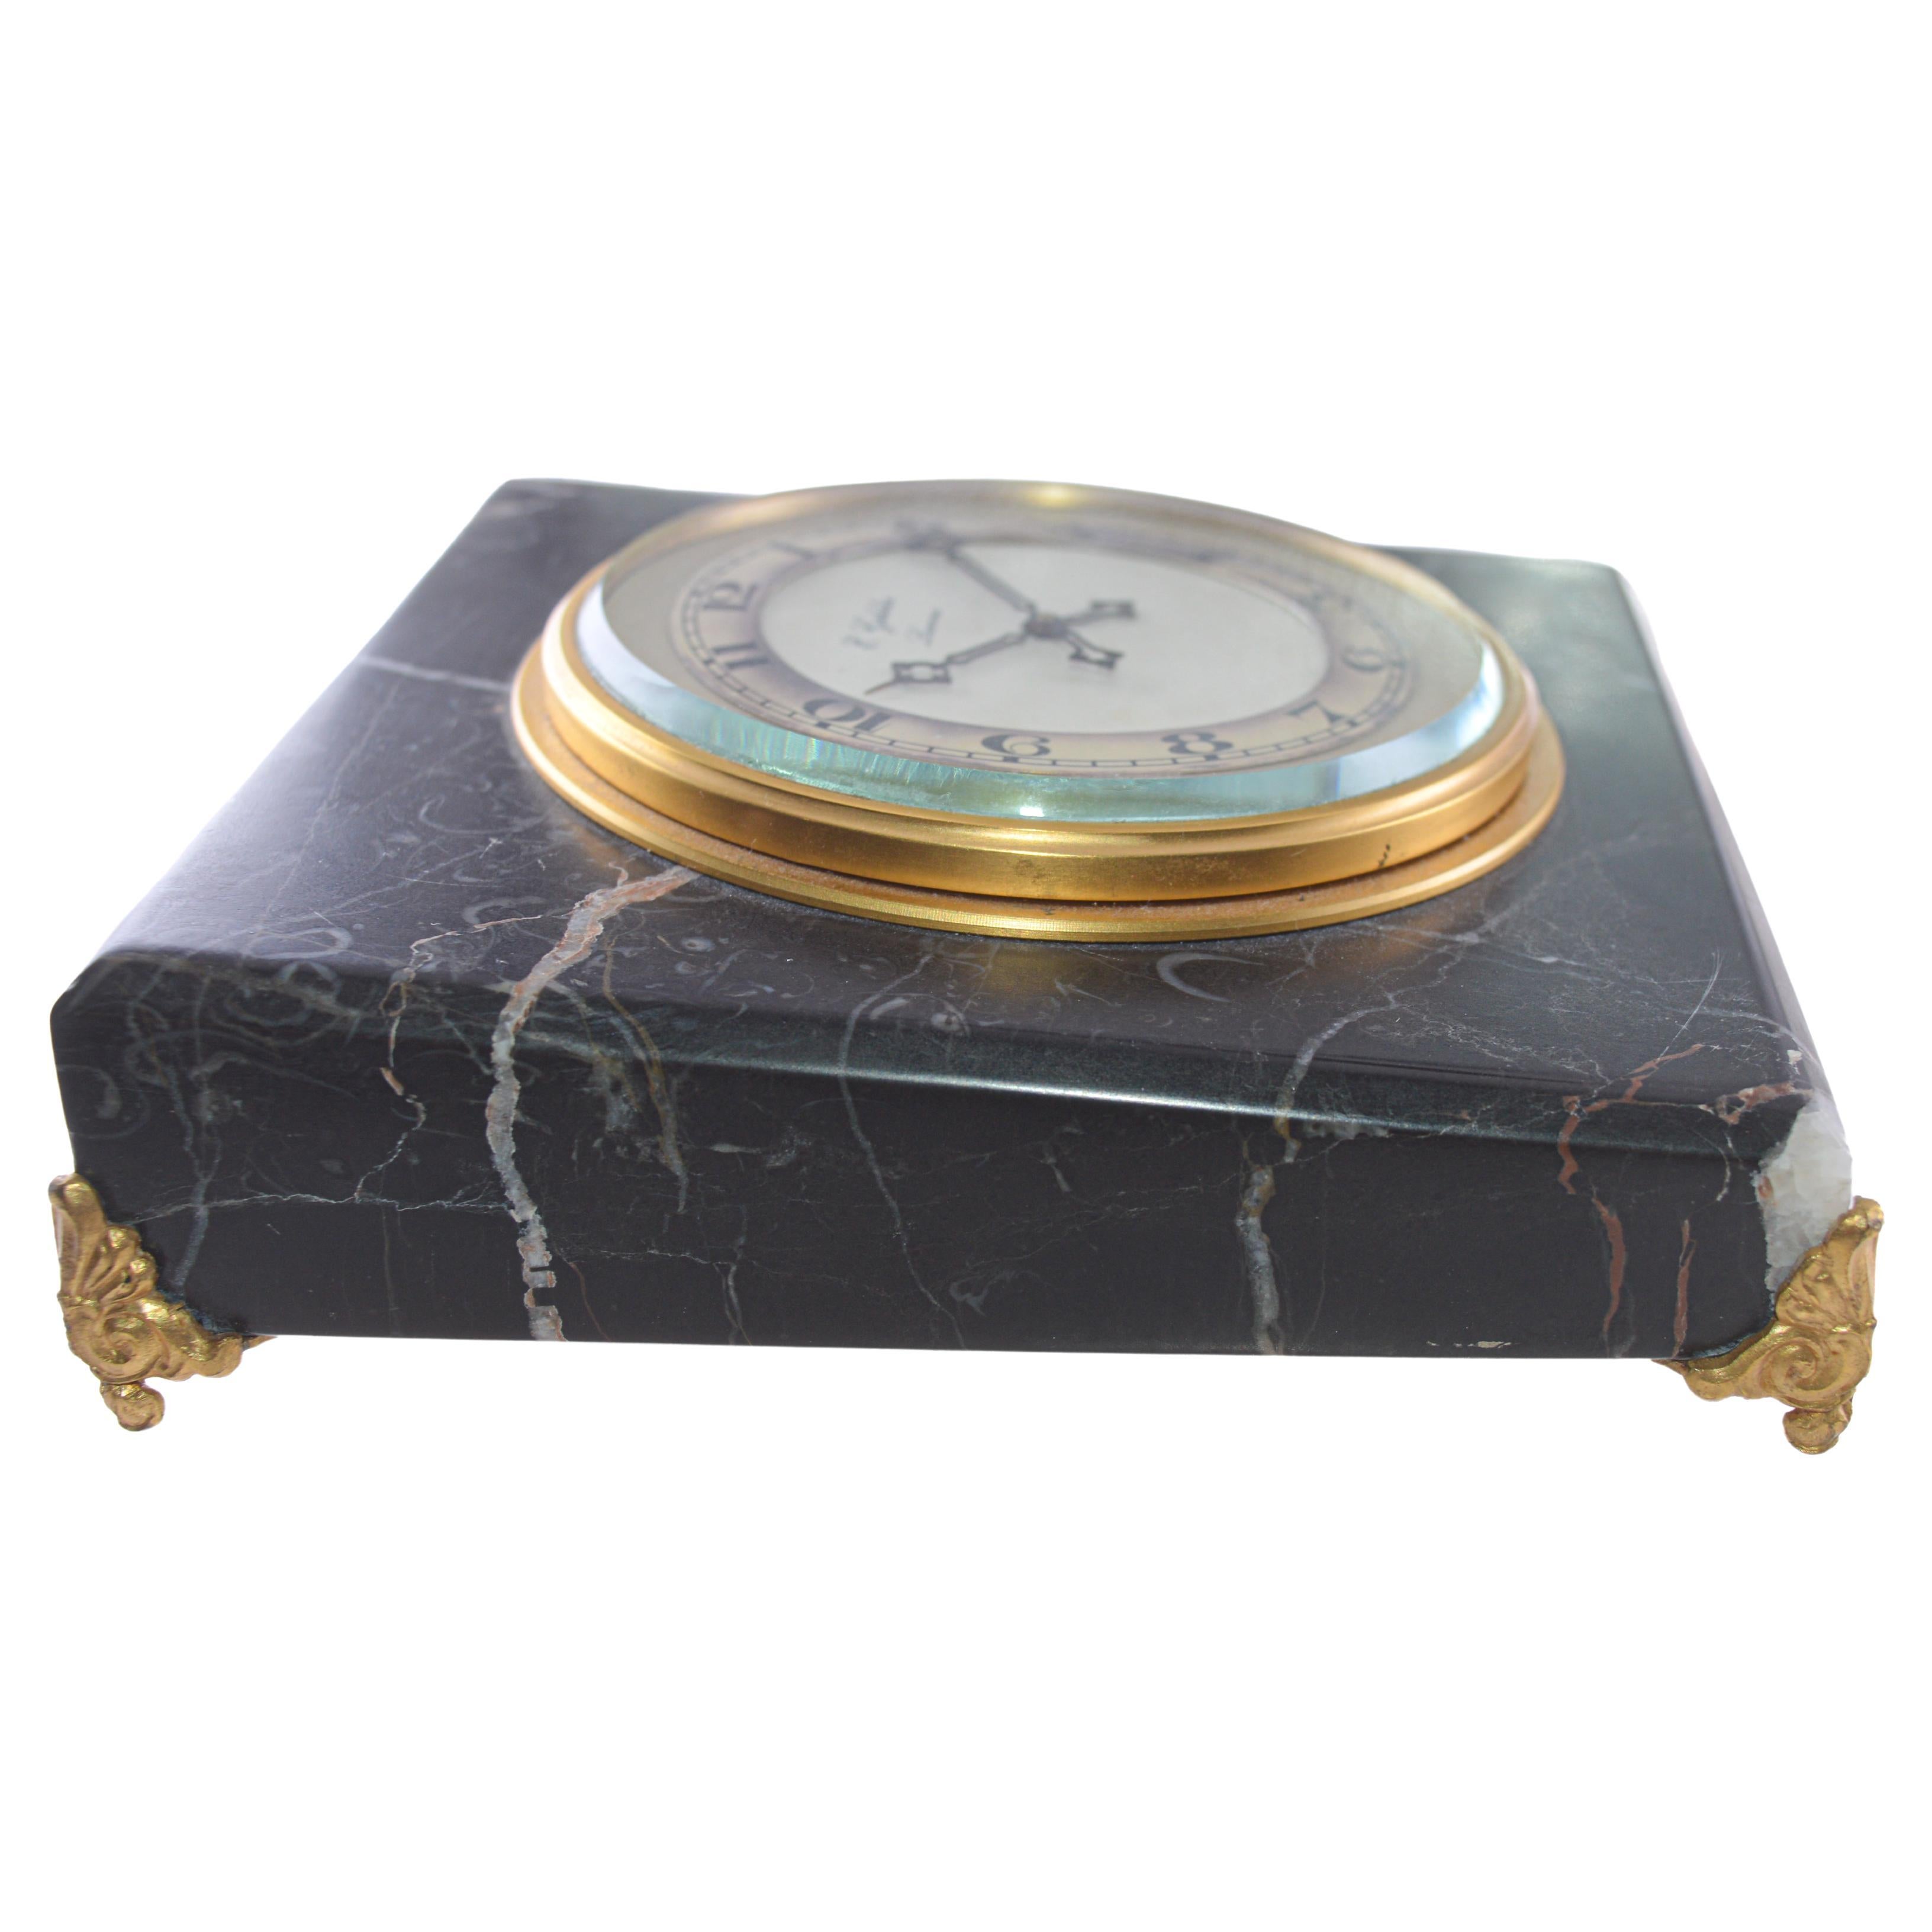 FACTORY / HOUSE: E. Gubelin Watch Company
STYLE / REFERENCE: Table Clock / Art Deco
METAL / MATERIAL: Stone / Bronze 
CIRCA / YEAR: 1930's
DIMENSIONS: 5